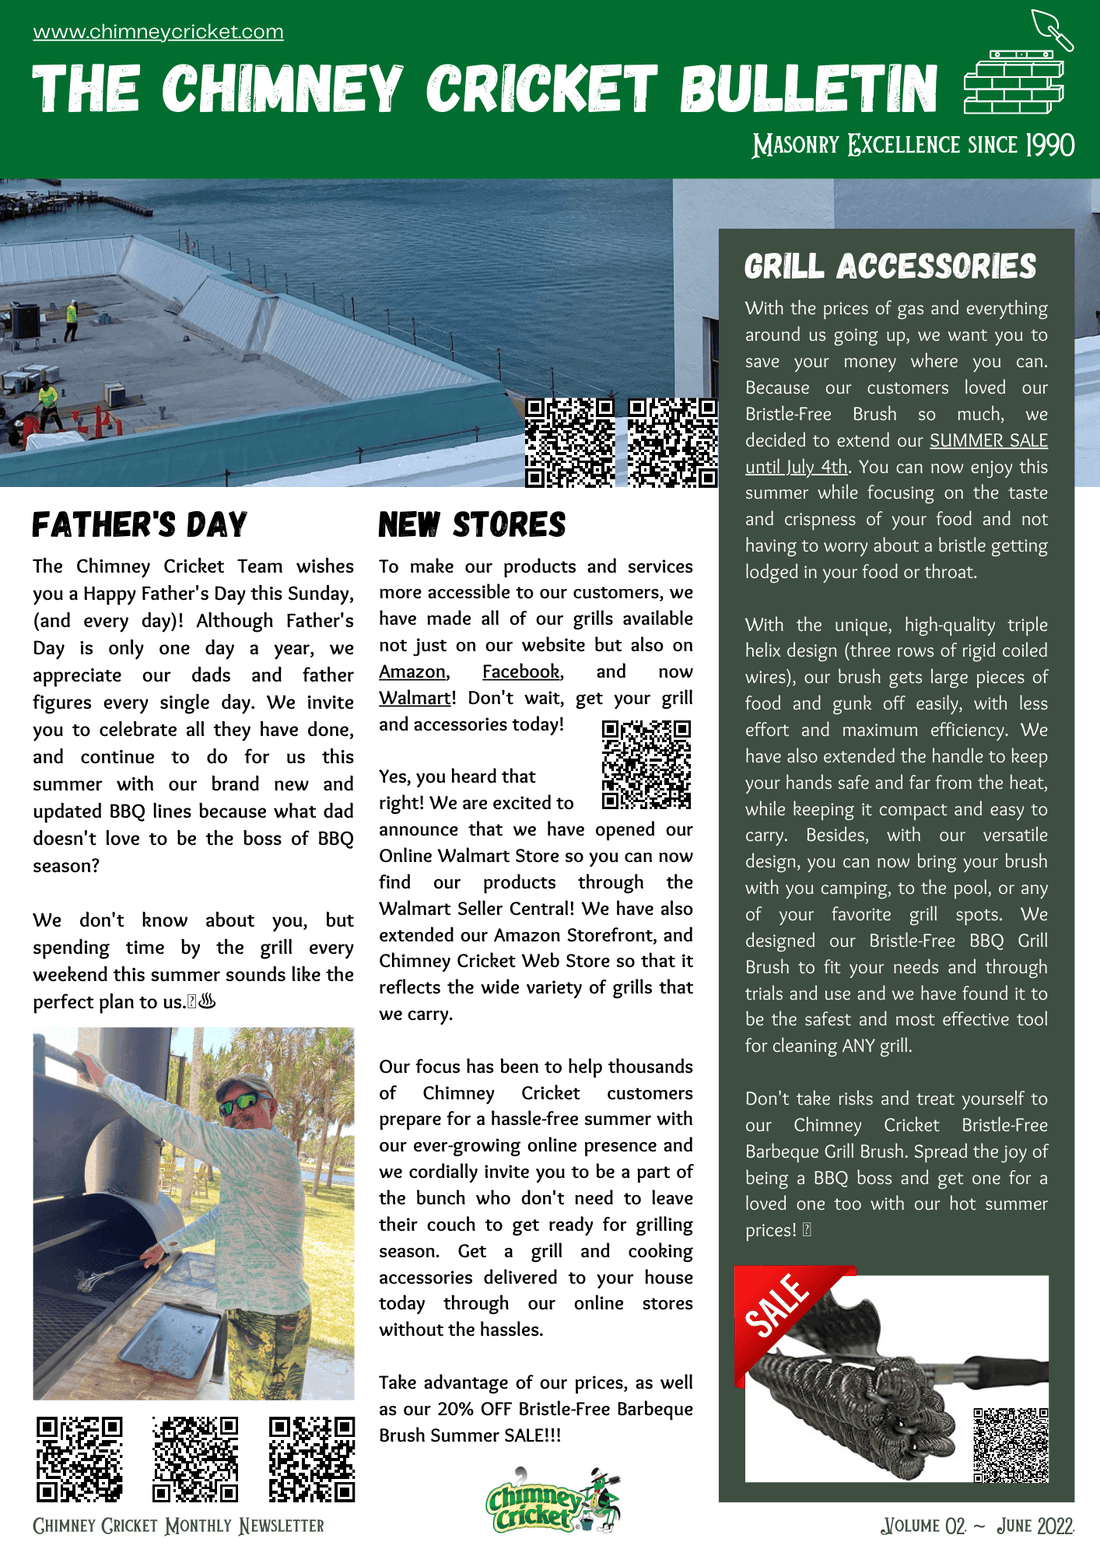 The Chimney Cricket Bulletin 🦗📰 June 2022 Edition 🌞 Father's Day, 4th of July Summer Sale, New Collections, and more! 🔥 - Chimney Cricket